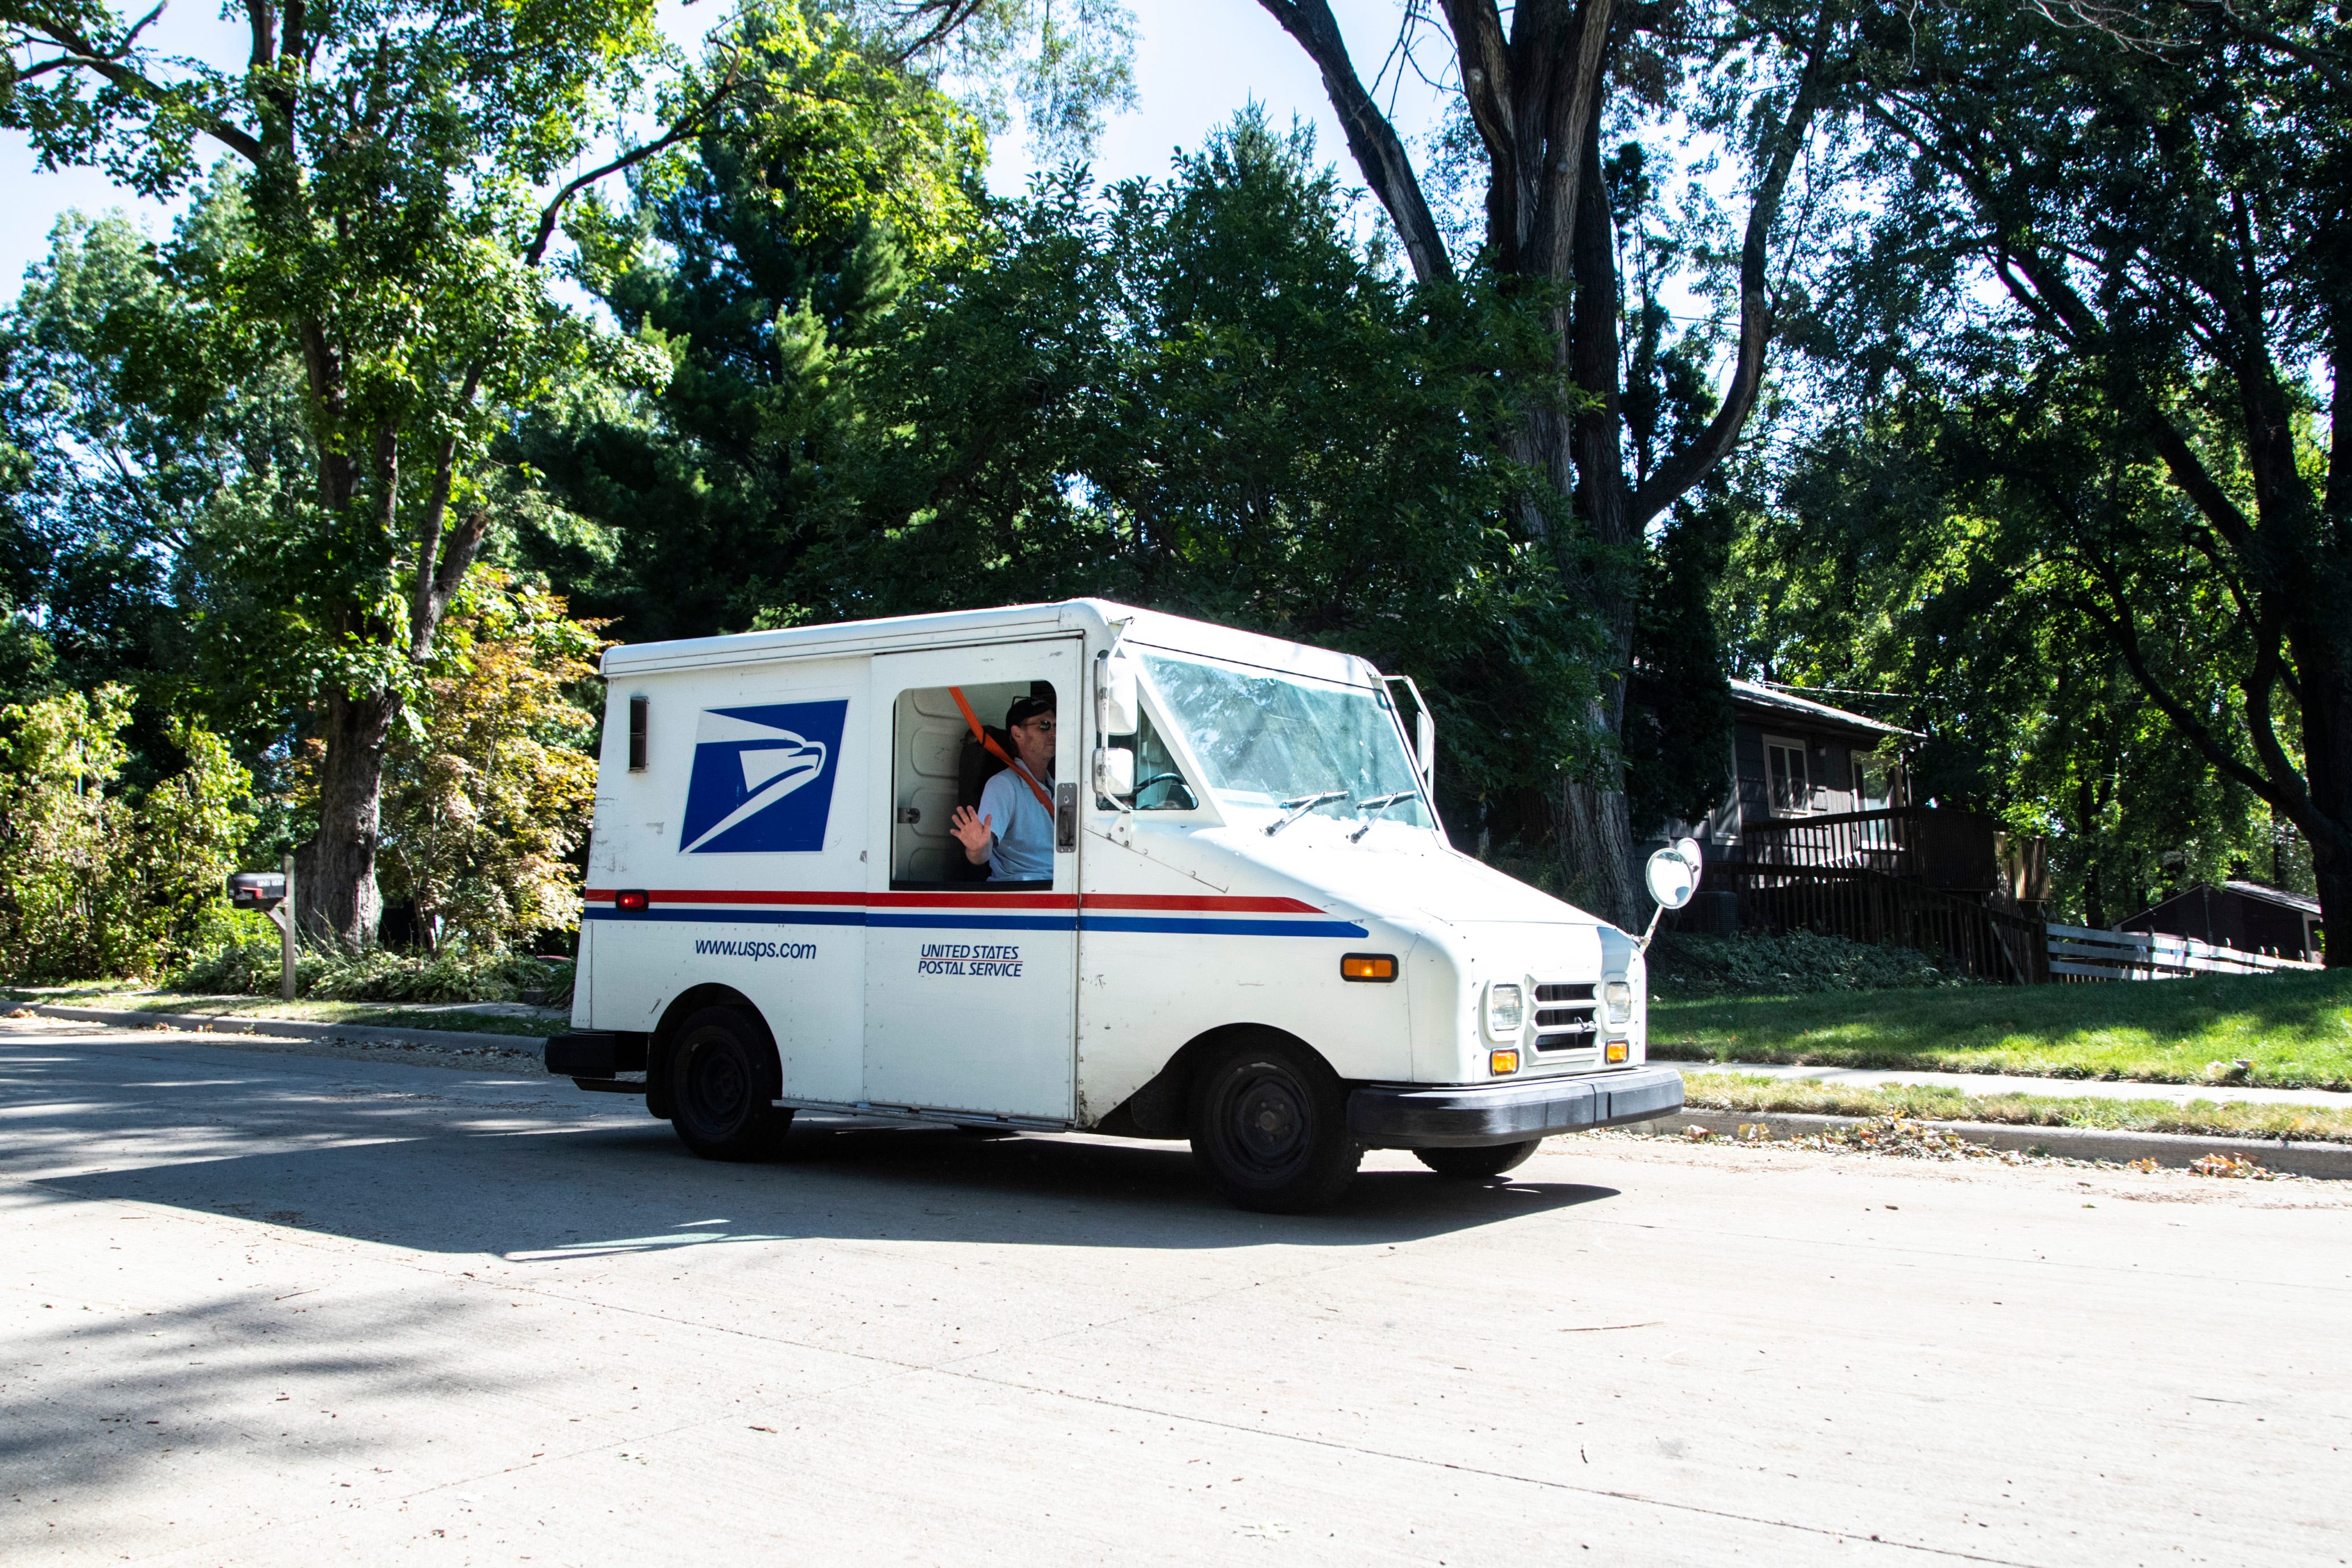 How to Track USPS Truck